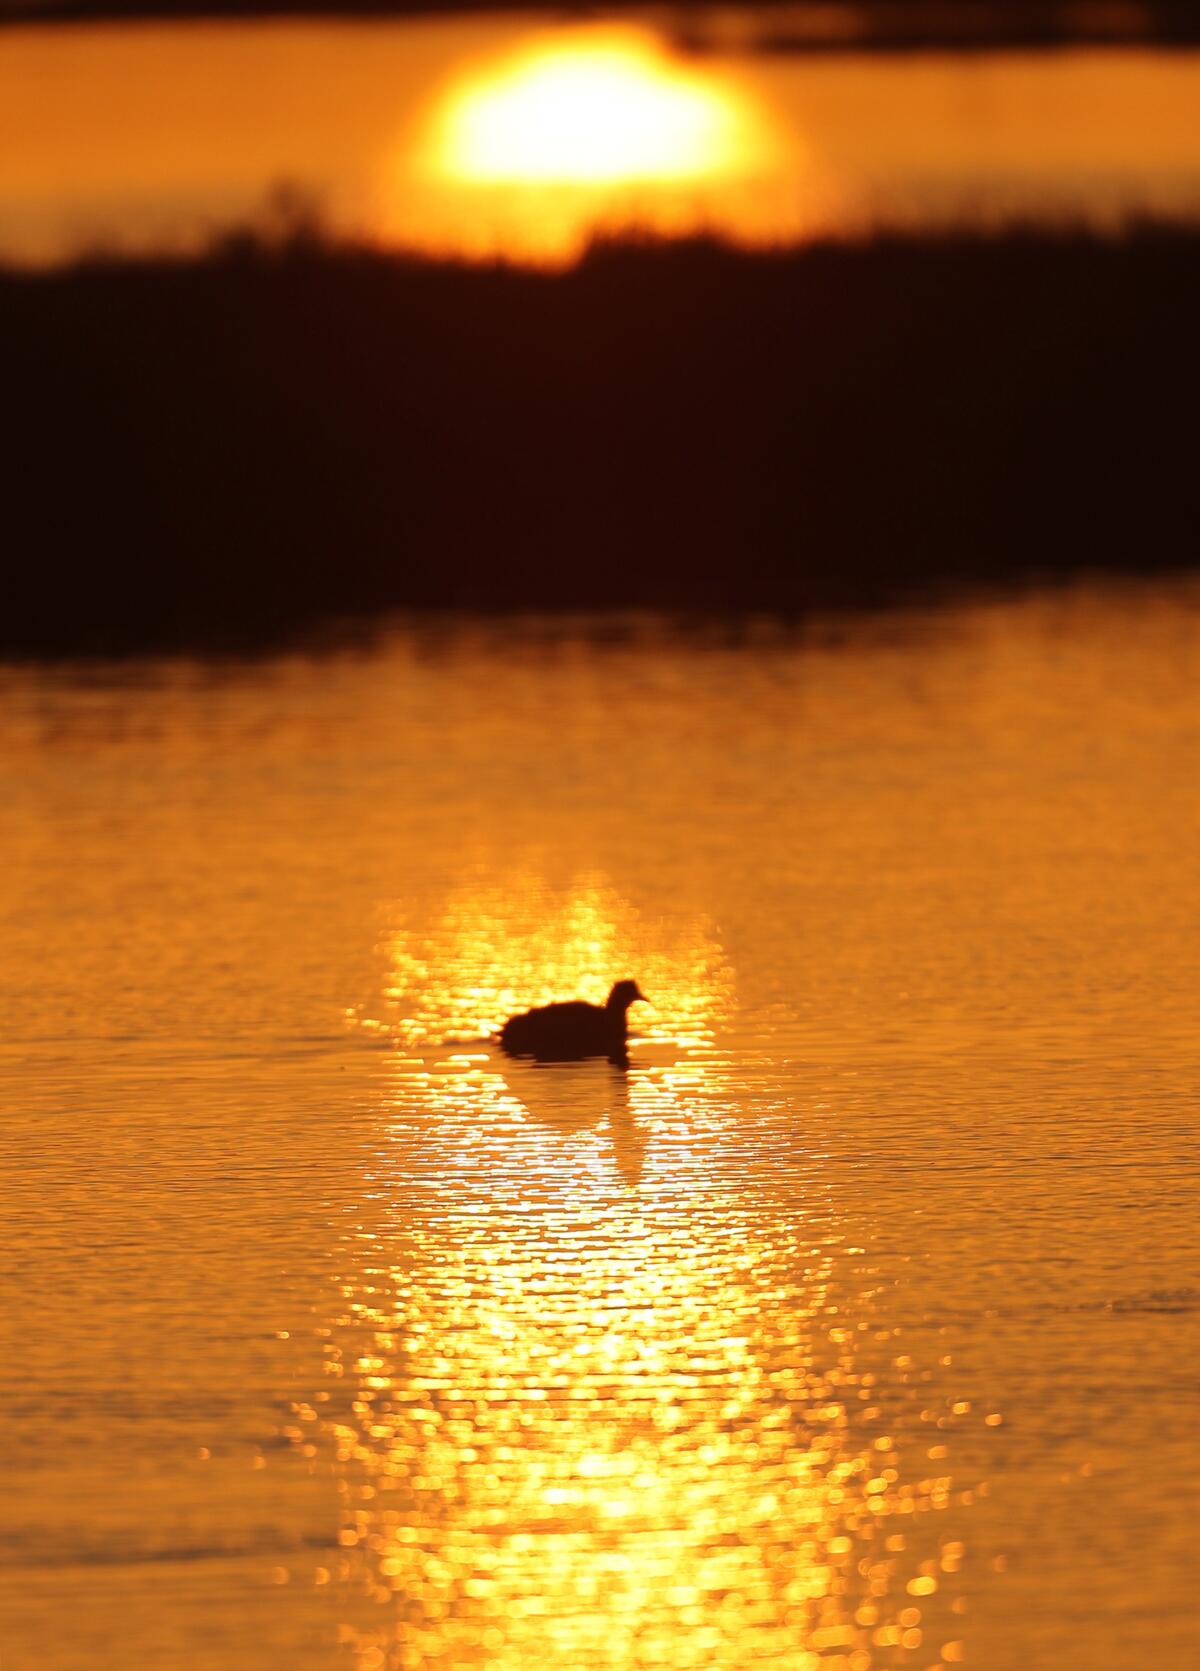 An American coot floats through the water during sunrise at Bolsa Chica Ecological Reserve in Huntington Beach.